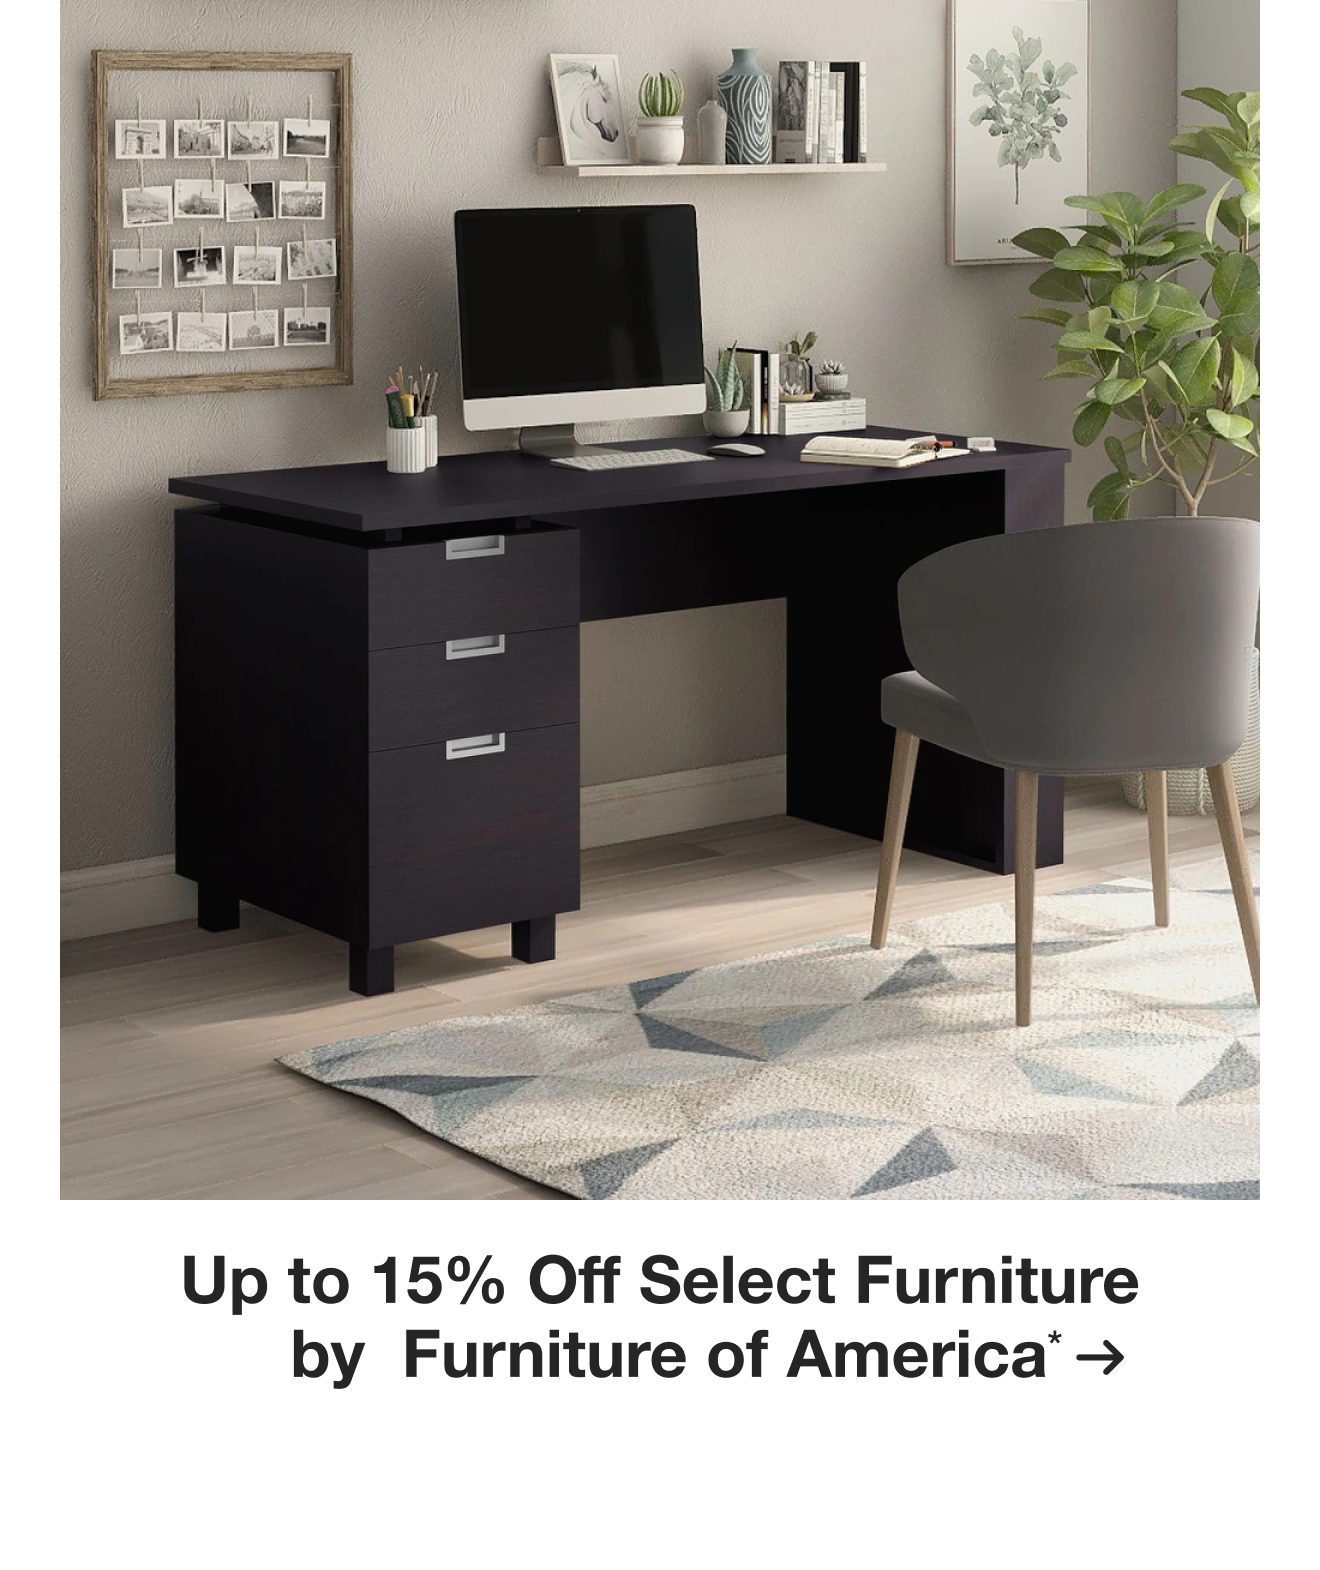 Up to 15% Off Select Furniture by Furniture of America*